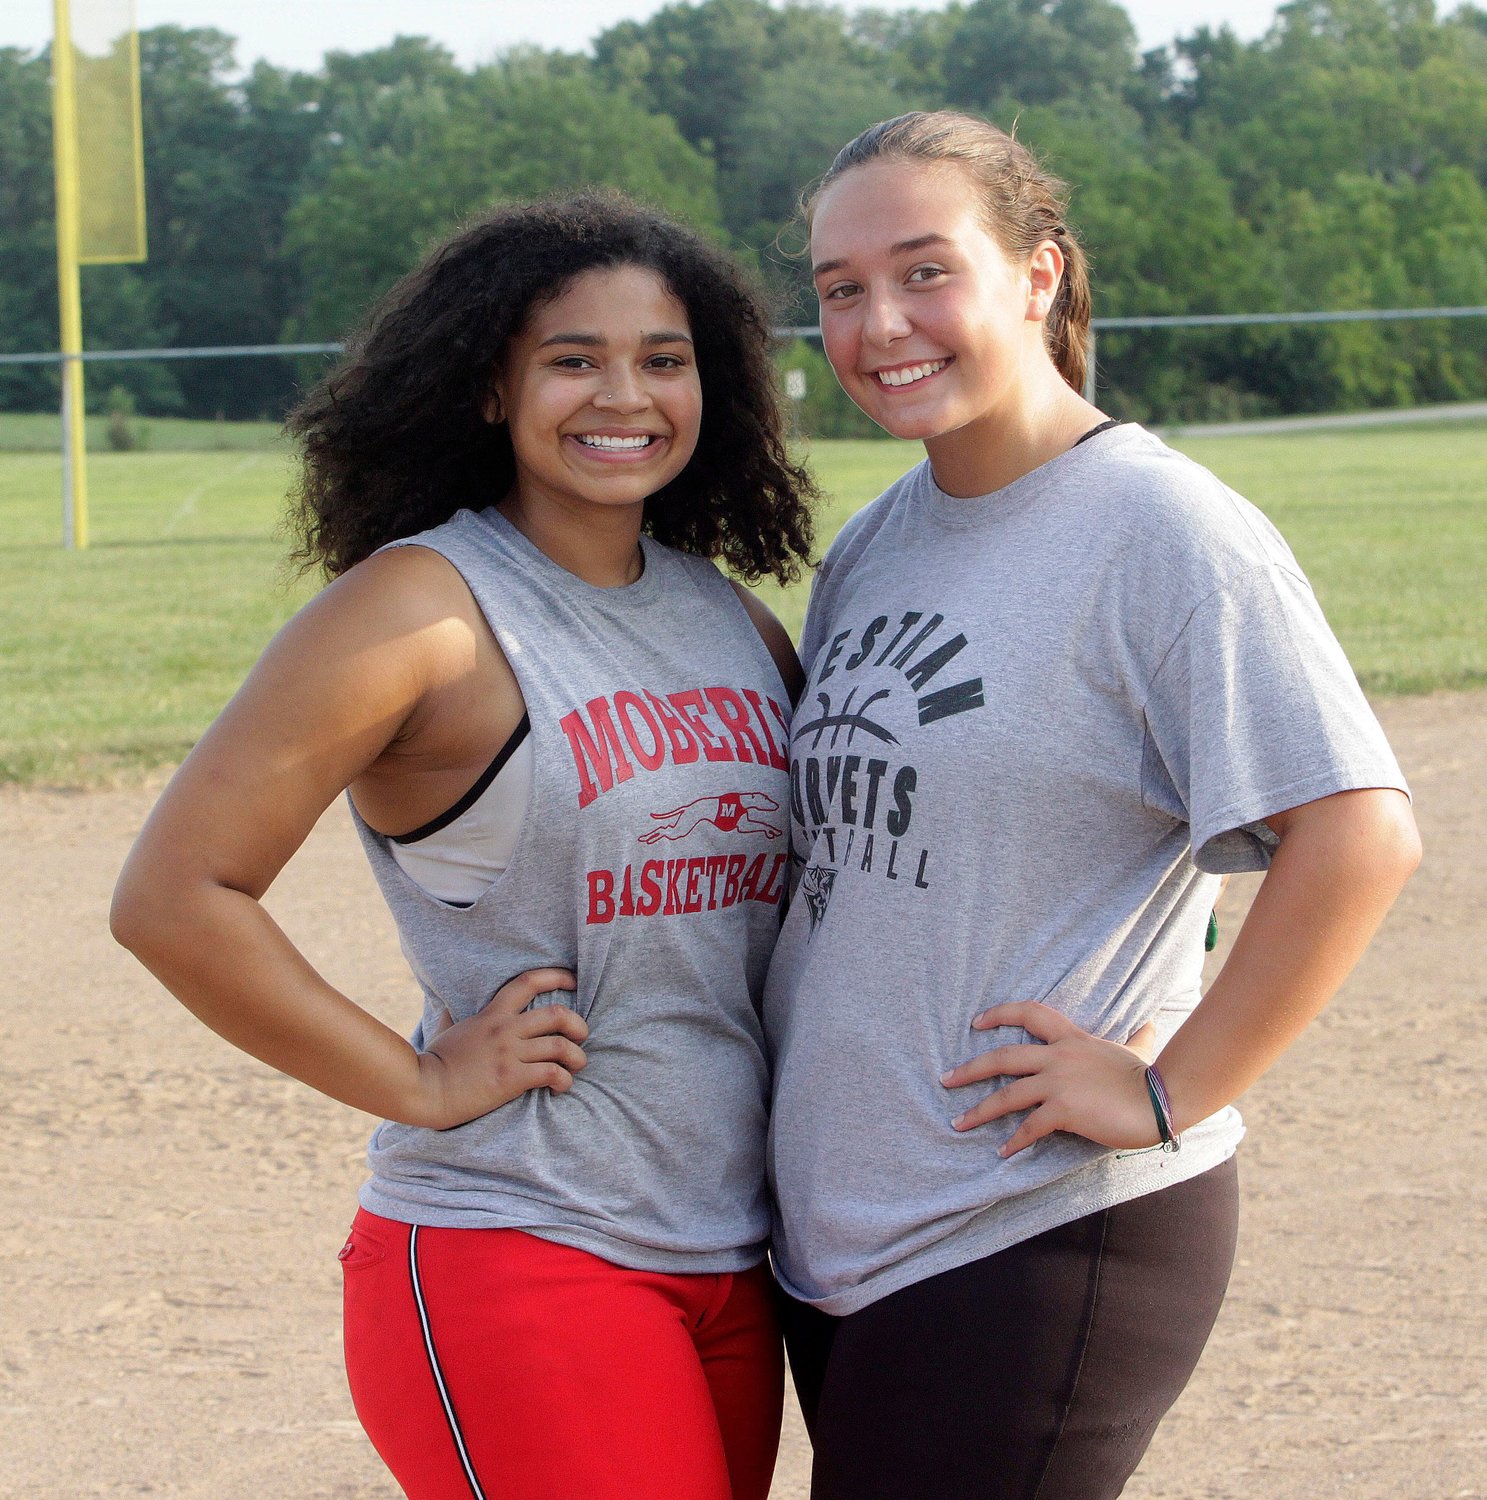 Westran senior centerfielder Kenzie Dawson and senior pitcher Maddy Harvey are looking for the Lady Hornets to take its first steps toward ending the school program's 6-year losing kid when Westran opens its 2021 schedule by participating in the Hallsville Invitational on Aug. 28.